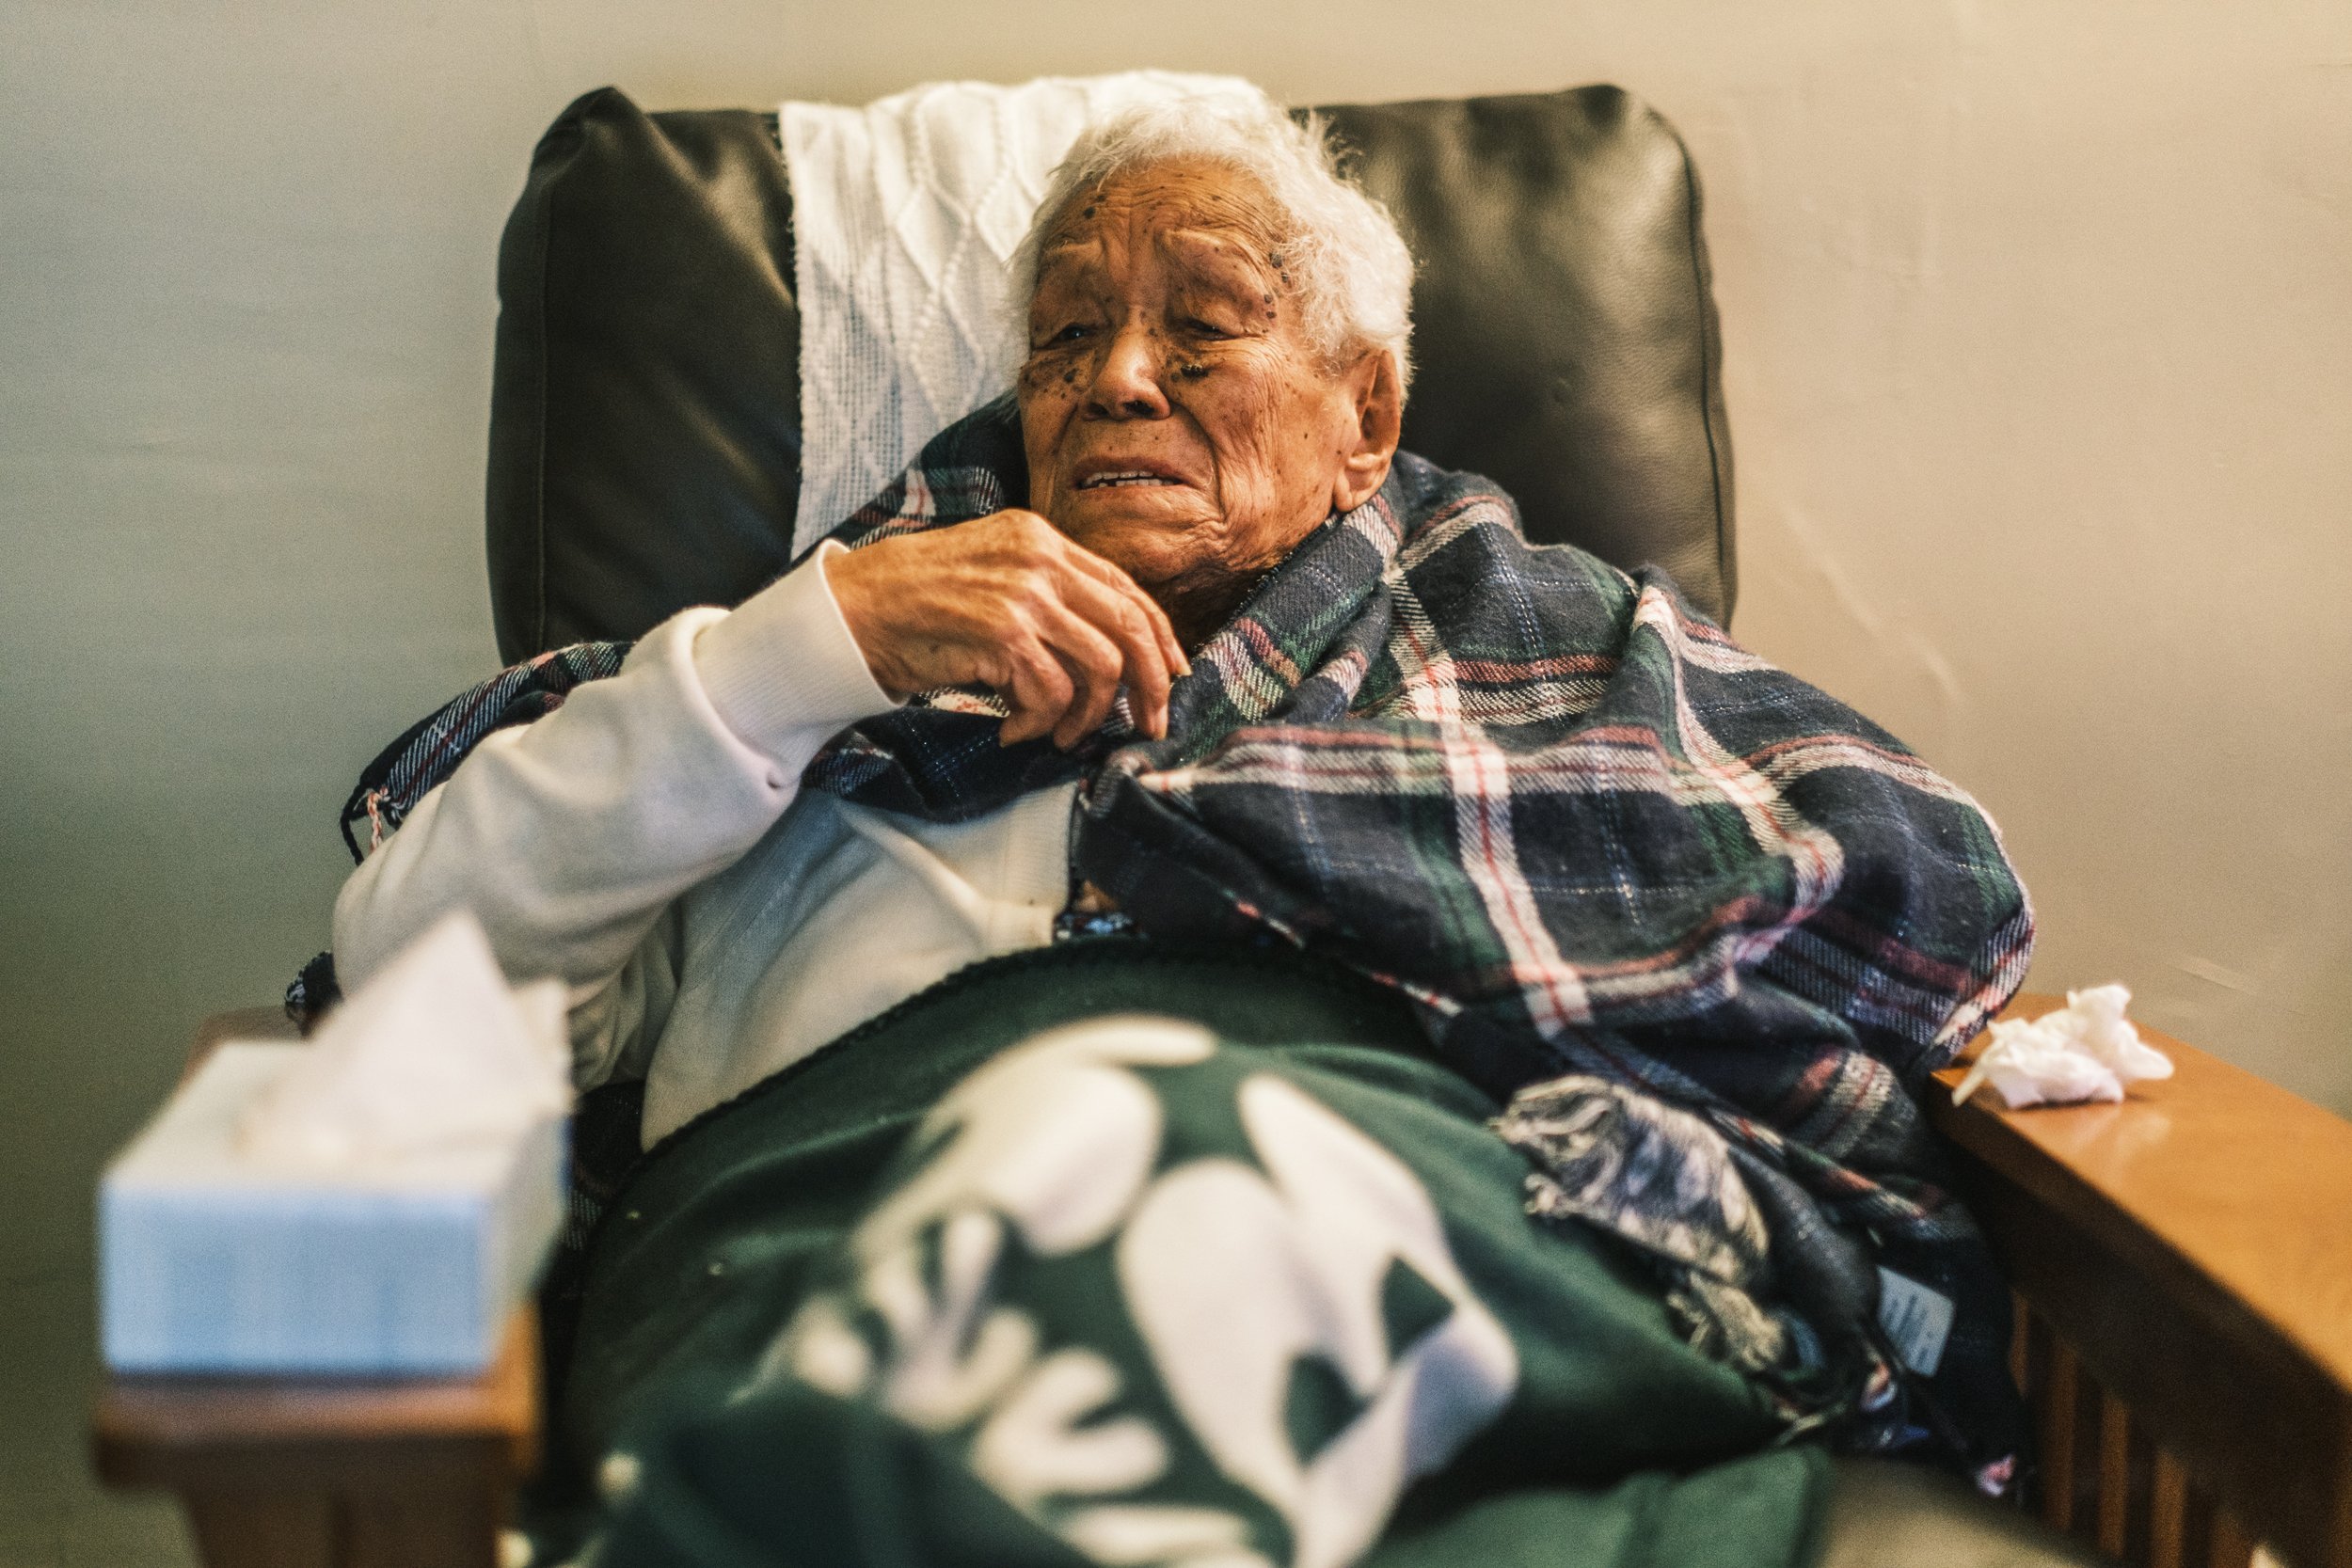  December 24, 2021 - Bronx, NY:  NYCHA resident Rosa Velasquez, 98, sits covered in blankets in her apartment, which has no heat. Velsaquez’s apartment building at the Bronx River Houses in the Bronx has not had heat in two weeks and despite multiple